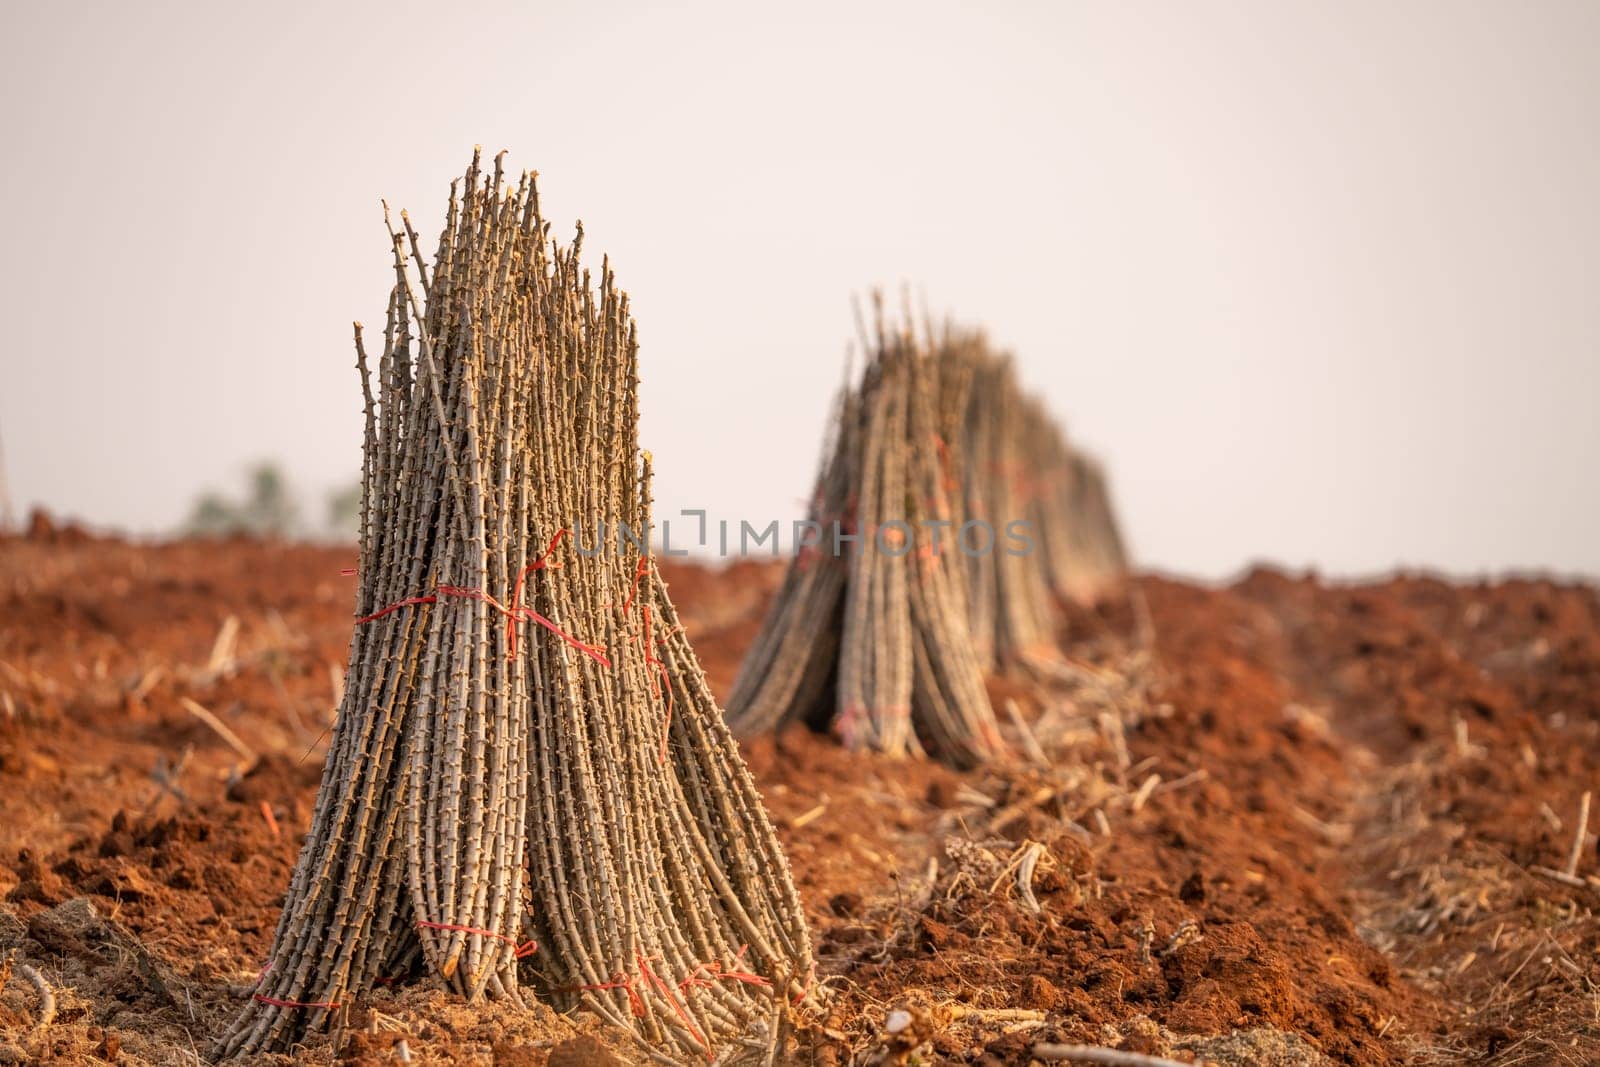 Cassava farm. Manioc or tapioca plant field. Bundle of cassava trees in cassava farm. The plowed field for planting crops. Sustainable farming. Agriculture in developing countries. Staple food crop.